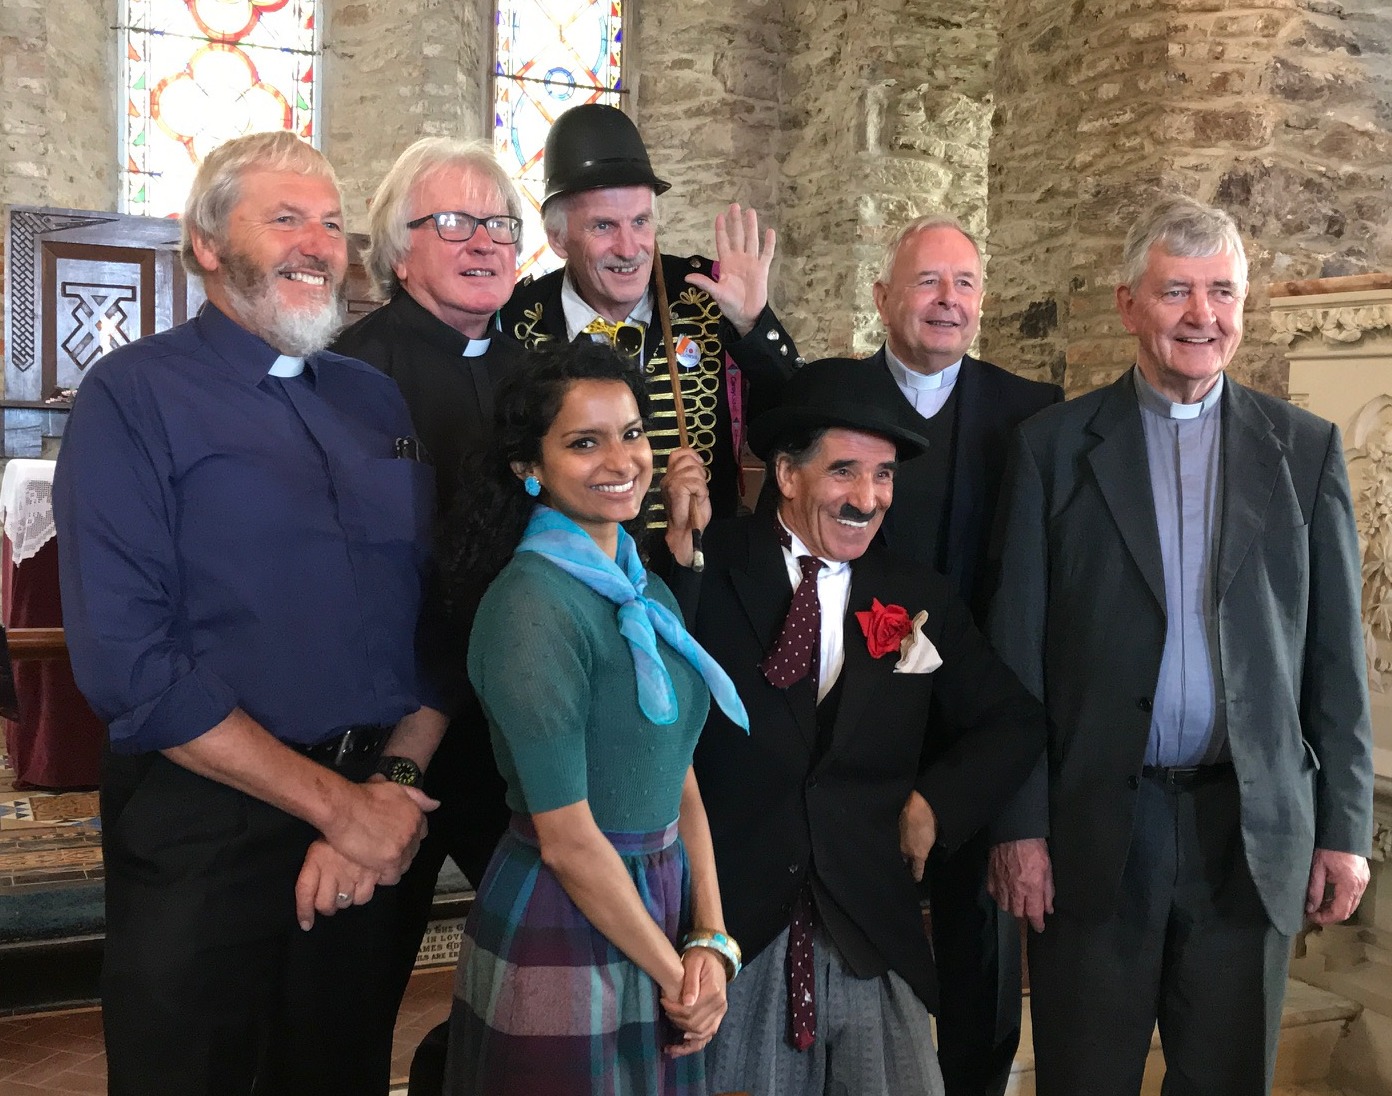 Left to right: The Revd Brian Rogers, the Revd Michael Cavanagh, an unnamed Keystone Cop, Fr Gerald Finucane and Fr Mike Curran with Charlie Pakdel and Lavinia De Silva. Photo by Marjory Cavanagh.